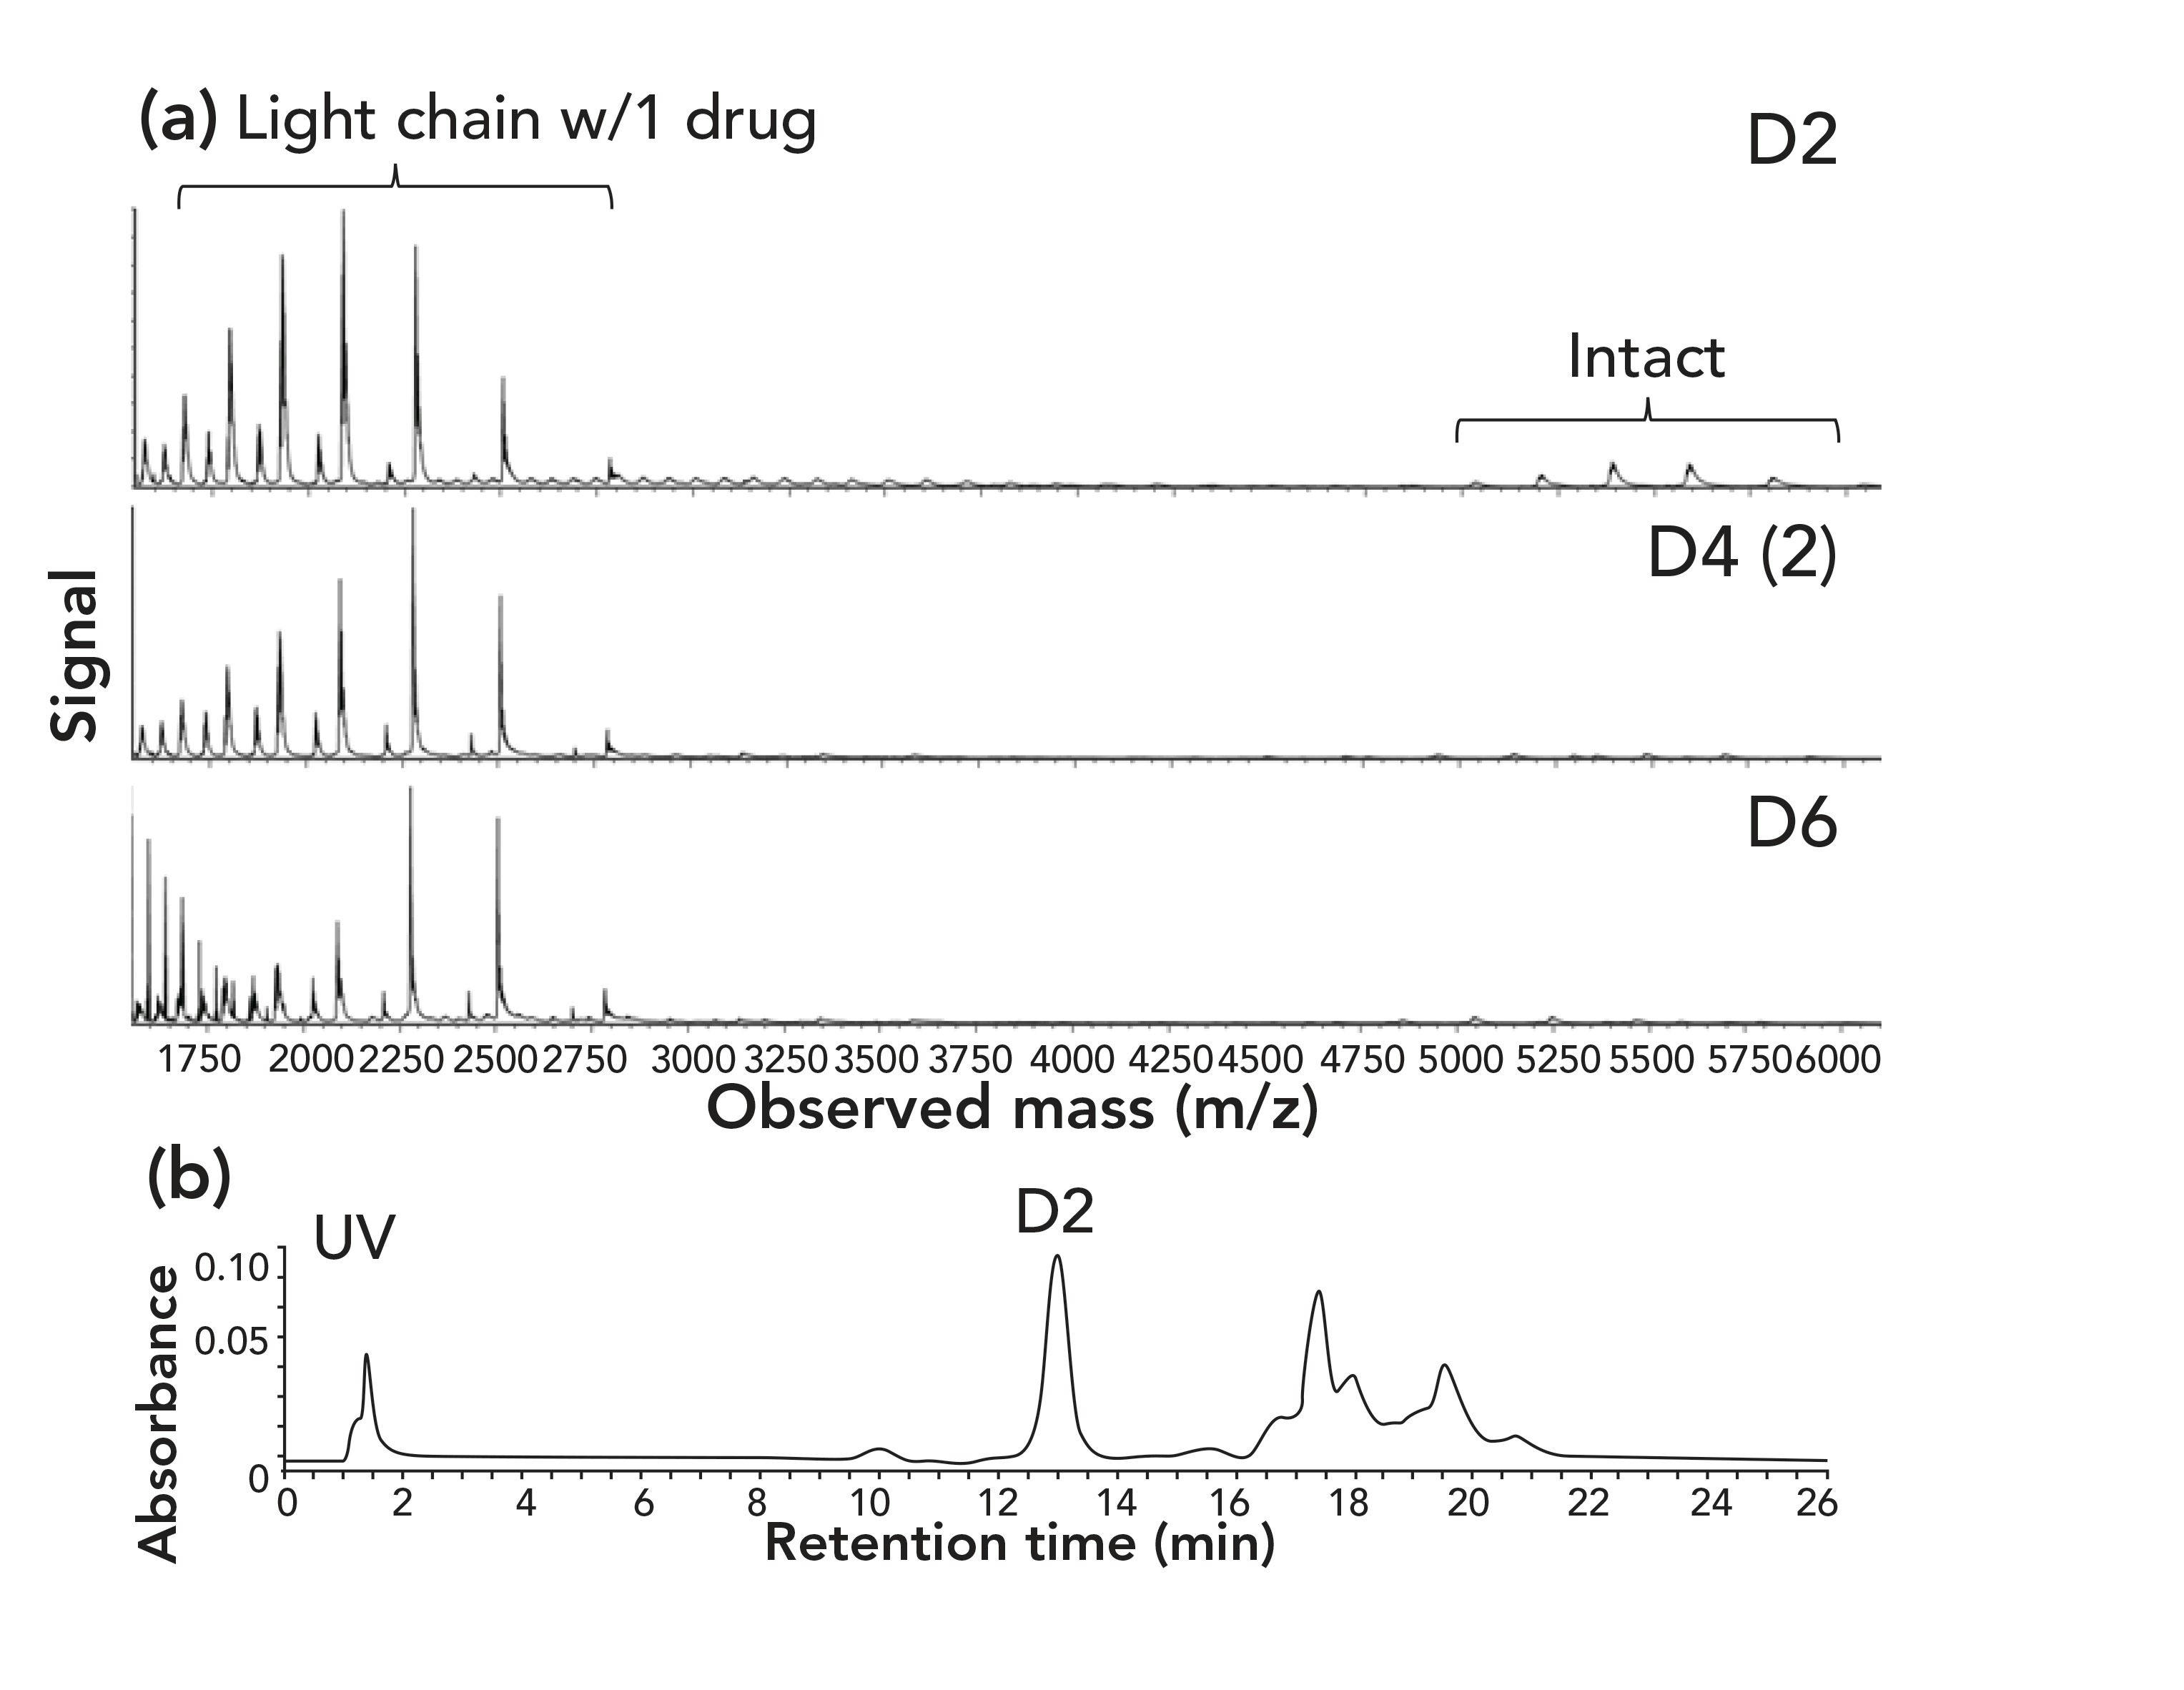 FIGURE 7: Analysis of brentuximab vedotin (Adcetris) on a column of silica with a coating of polymethyl methacrylate. (a) Mass spectra of ADC DAR-2, DAR-4 and DAR-6 variants obtained with a Xevo G2 qTOF mass spectrometer. (b) UV absorbance trace. Adapted from reference (11).